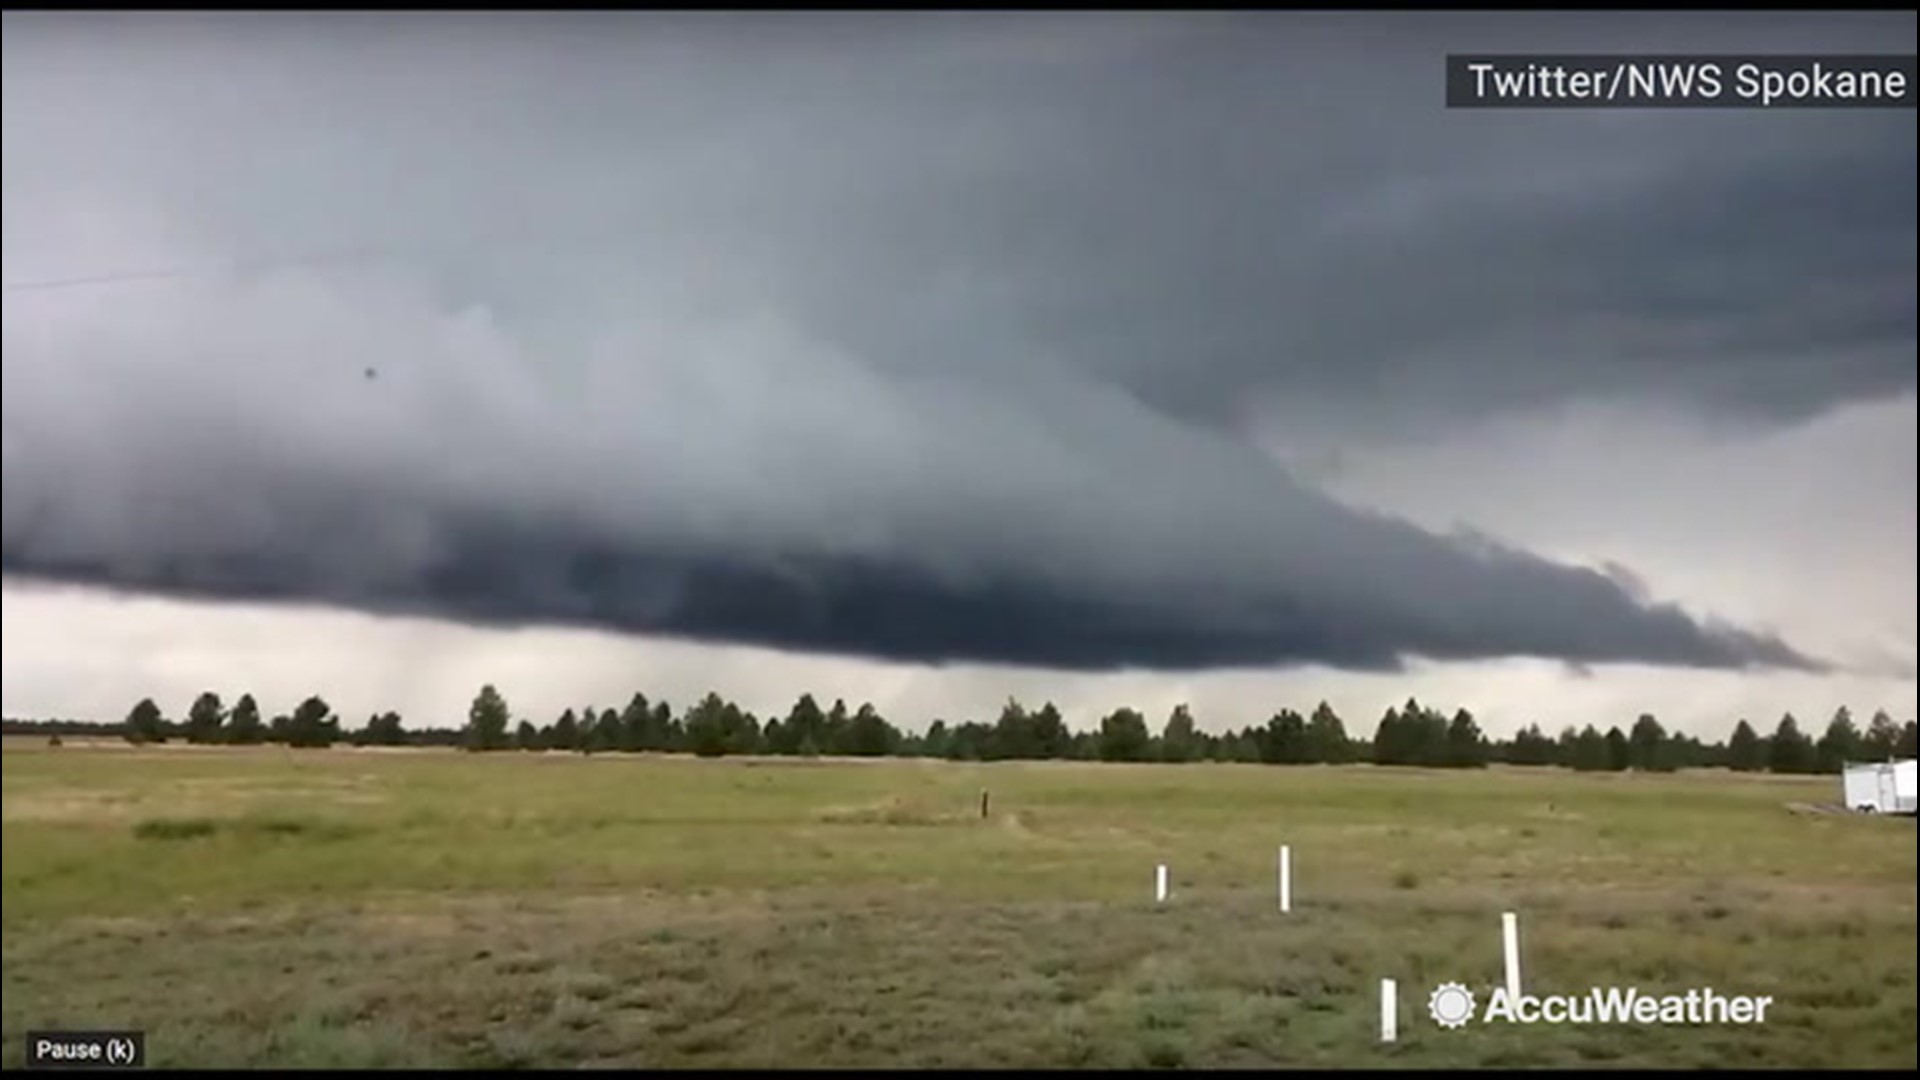 On Sept. 18, a storm in Spokane, Washington, passed right over the local National Weather Service office building. The office was able to record a time-lapse video of the storm as it moved by.